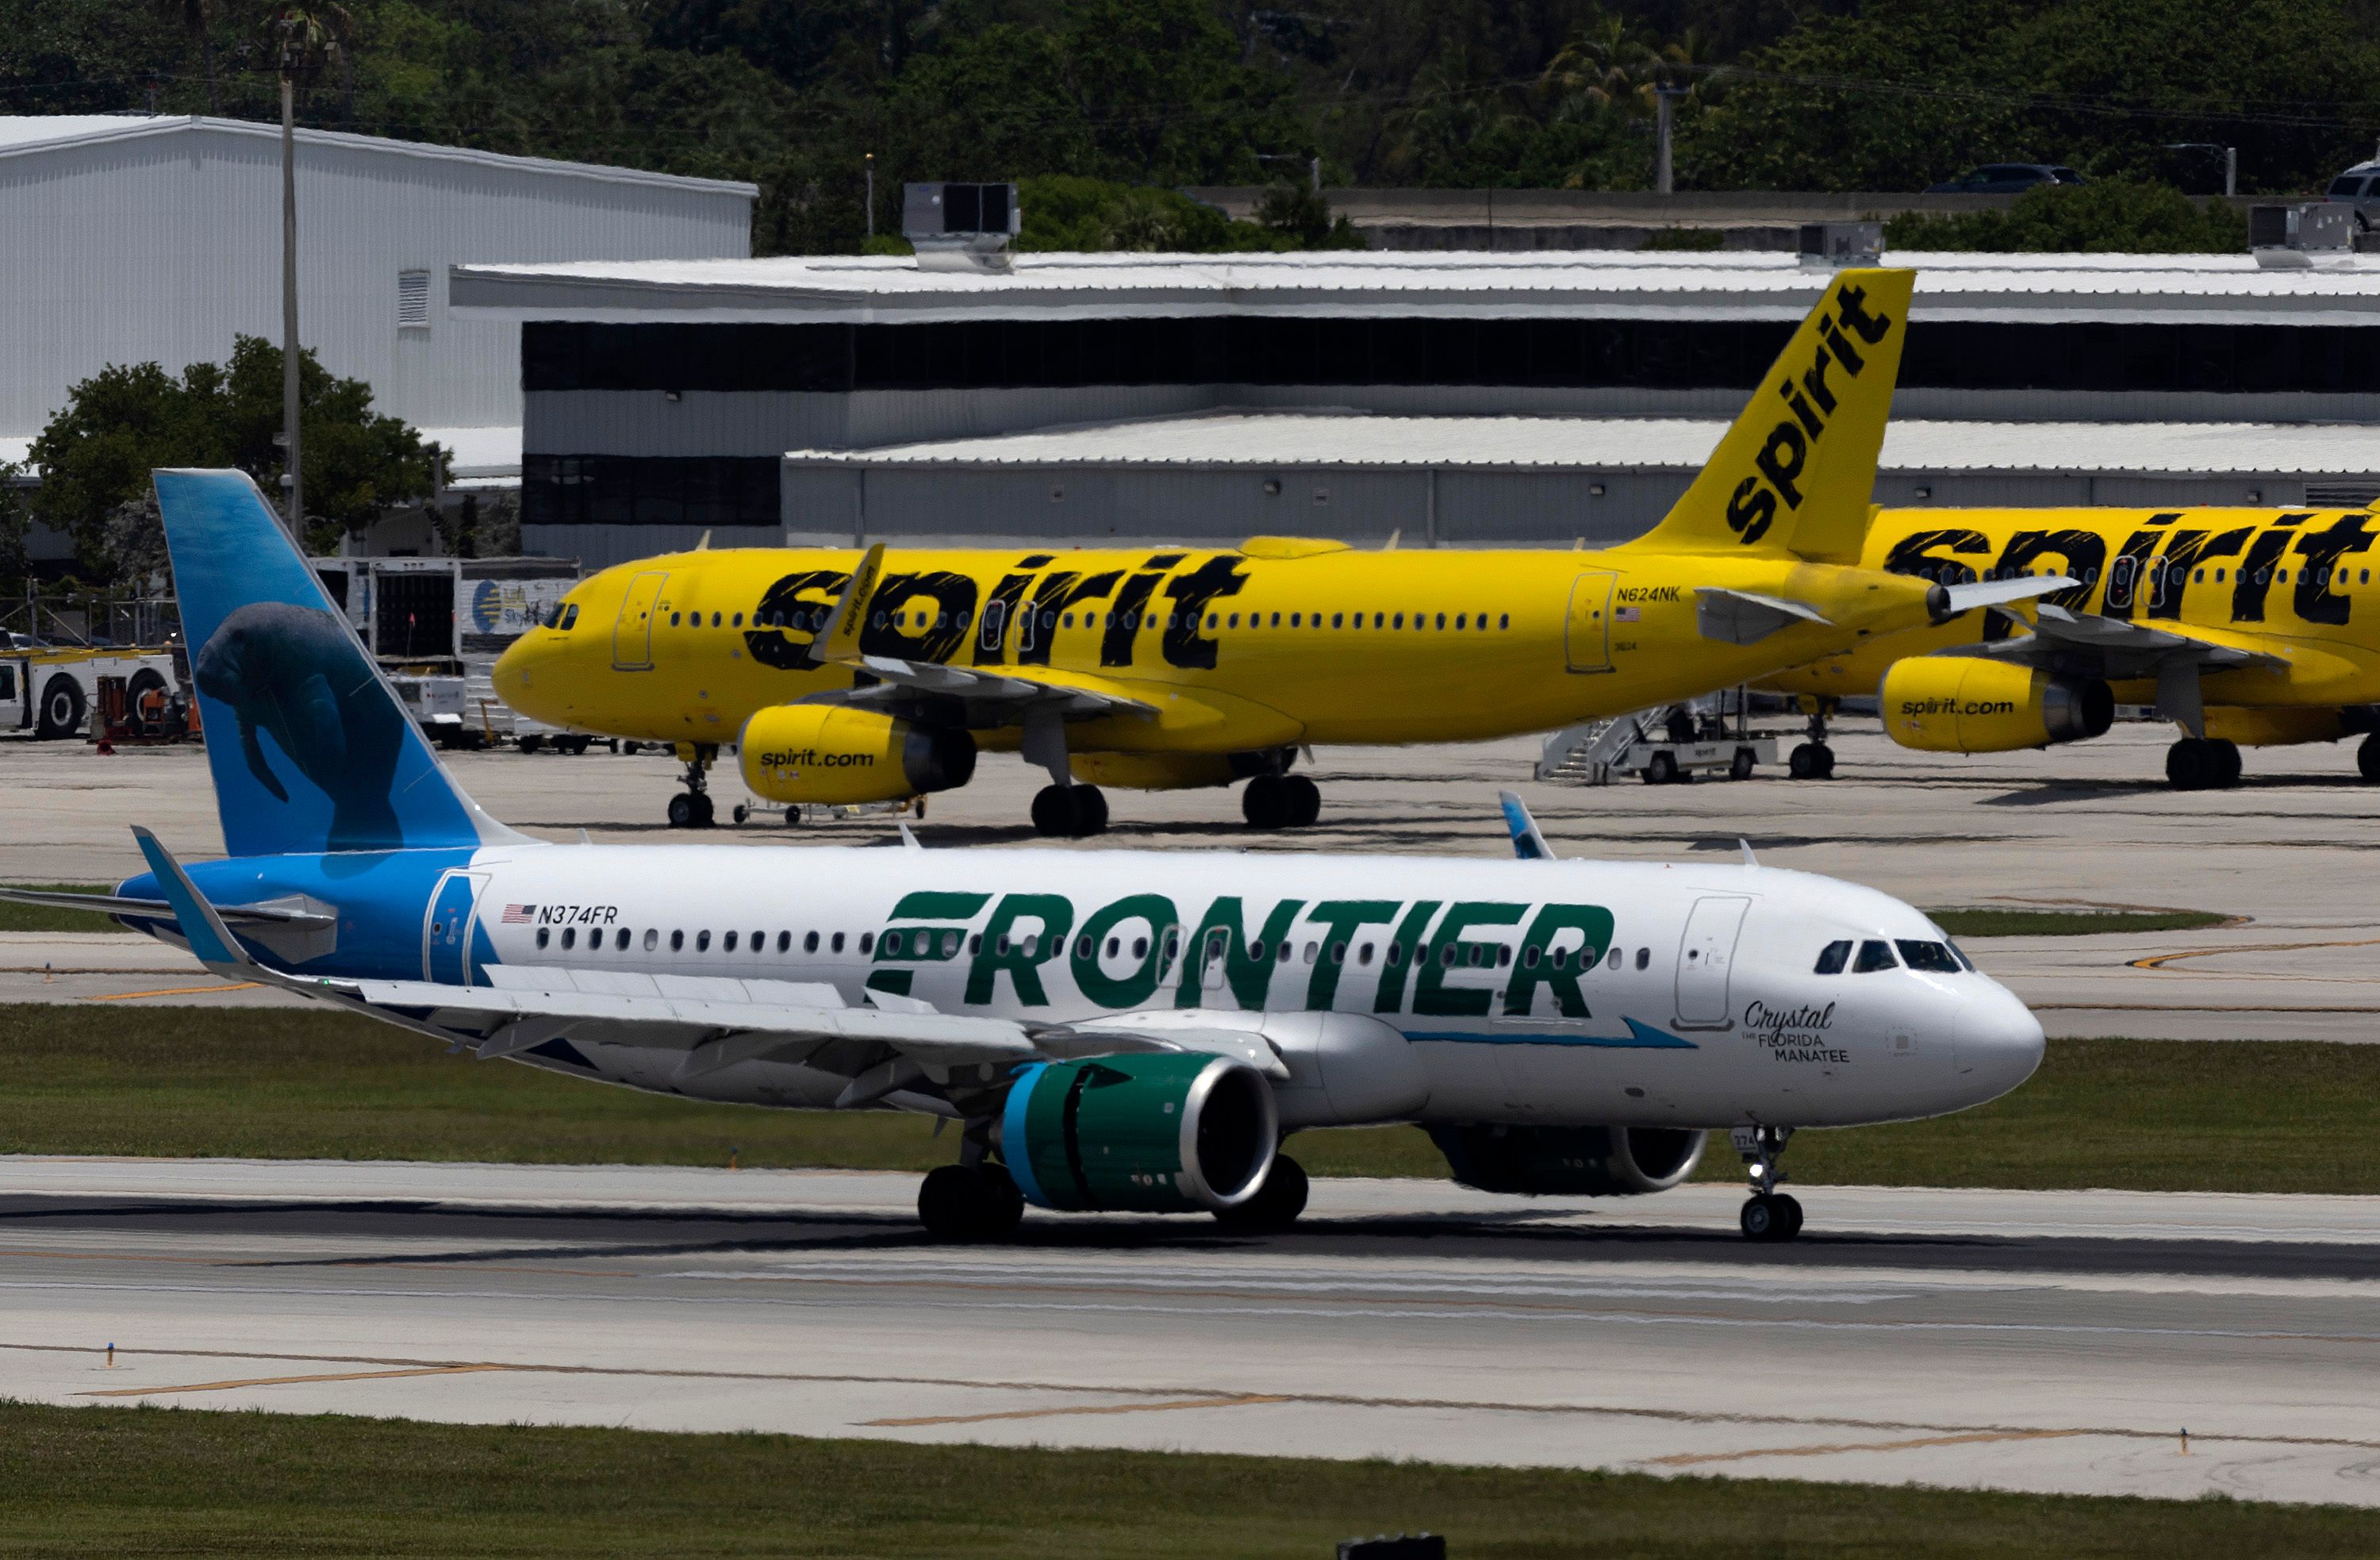 A Frontier Airlines plane near a Spirit Airlines plane at the Fort Lauderdale-Hollywood International Airport on May 16, 2022 in Fort Lauderdale, Florida. 